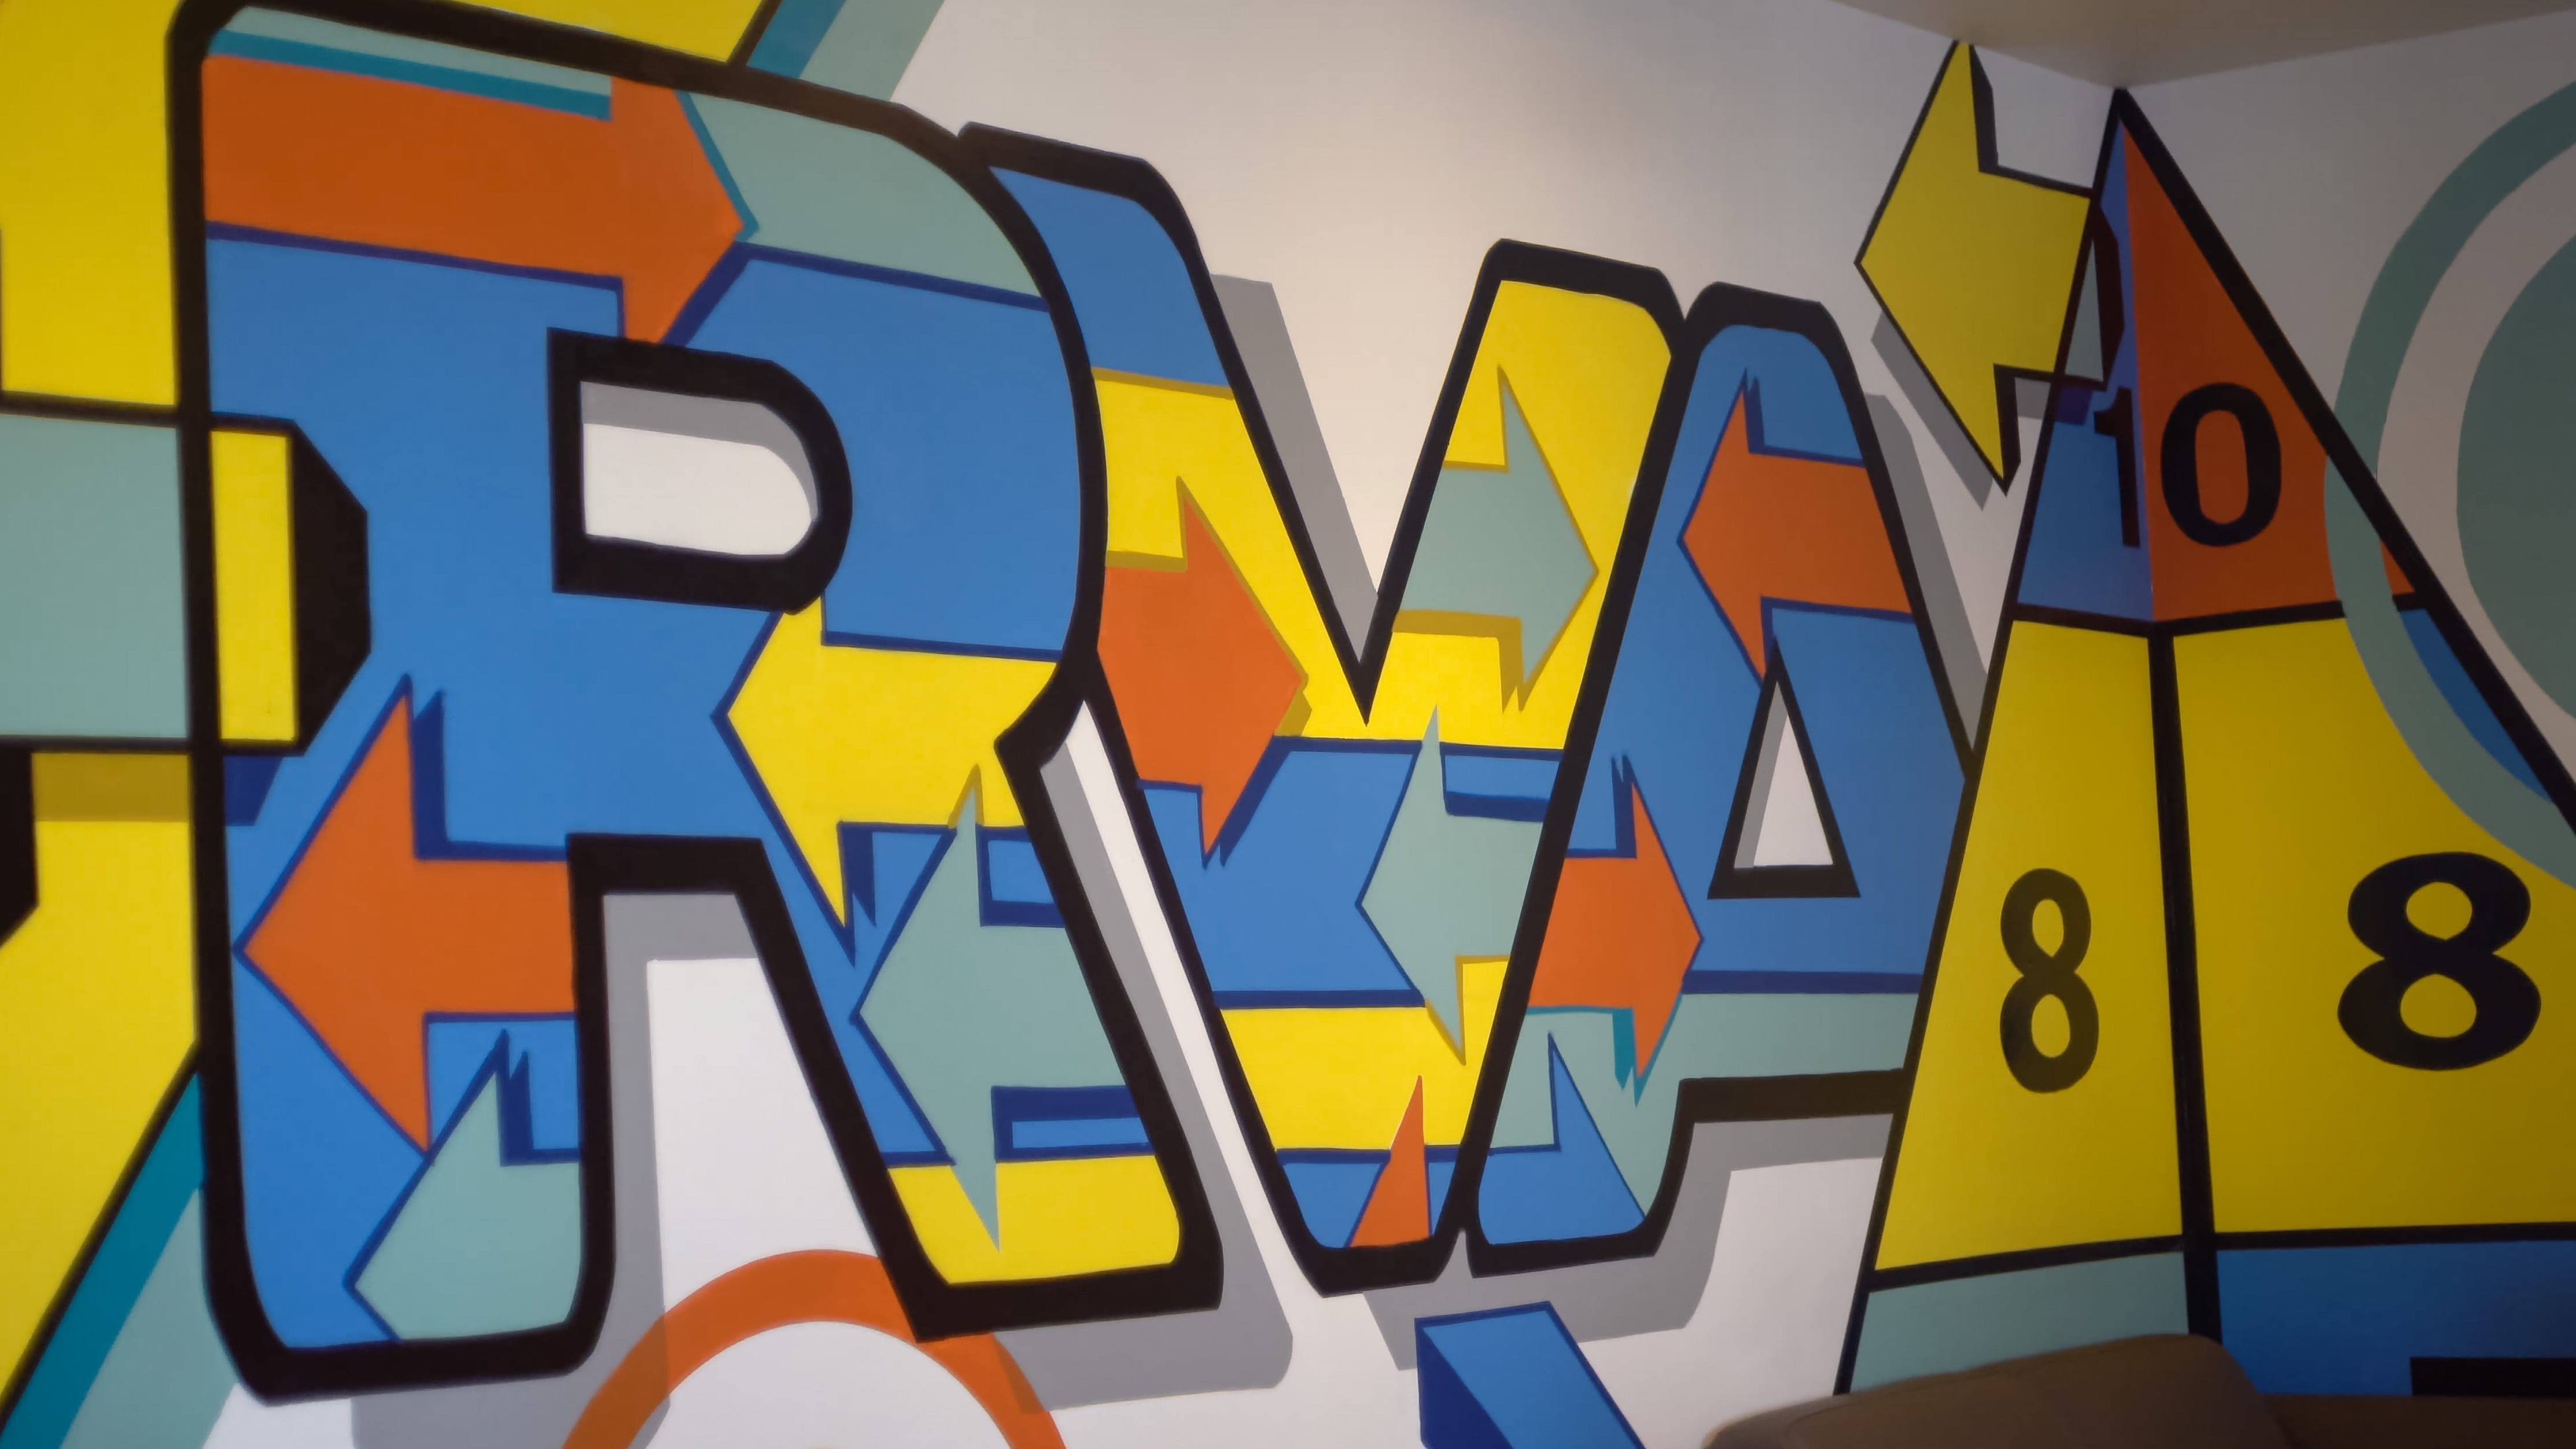 A wall mural that says "RVA" designed with multicolored arrows.